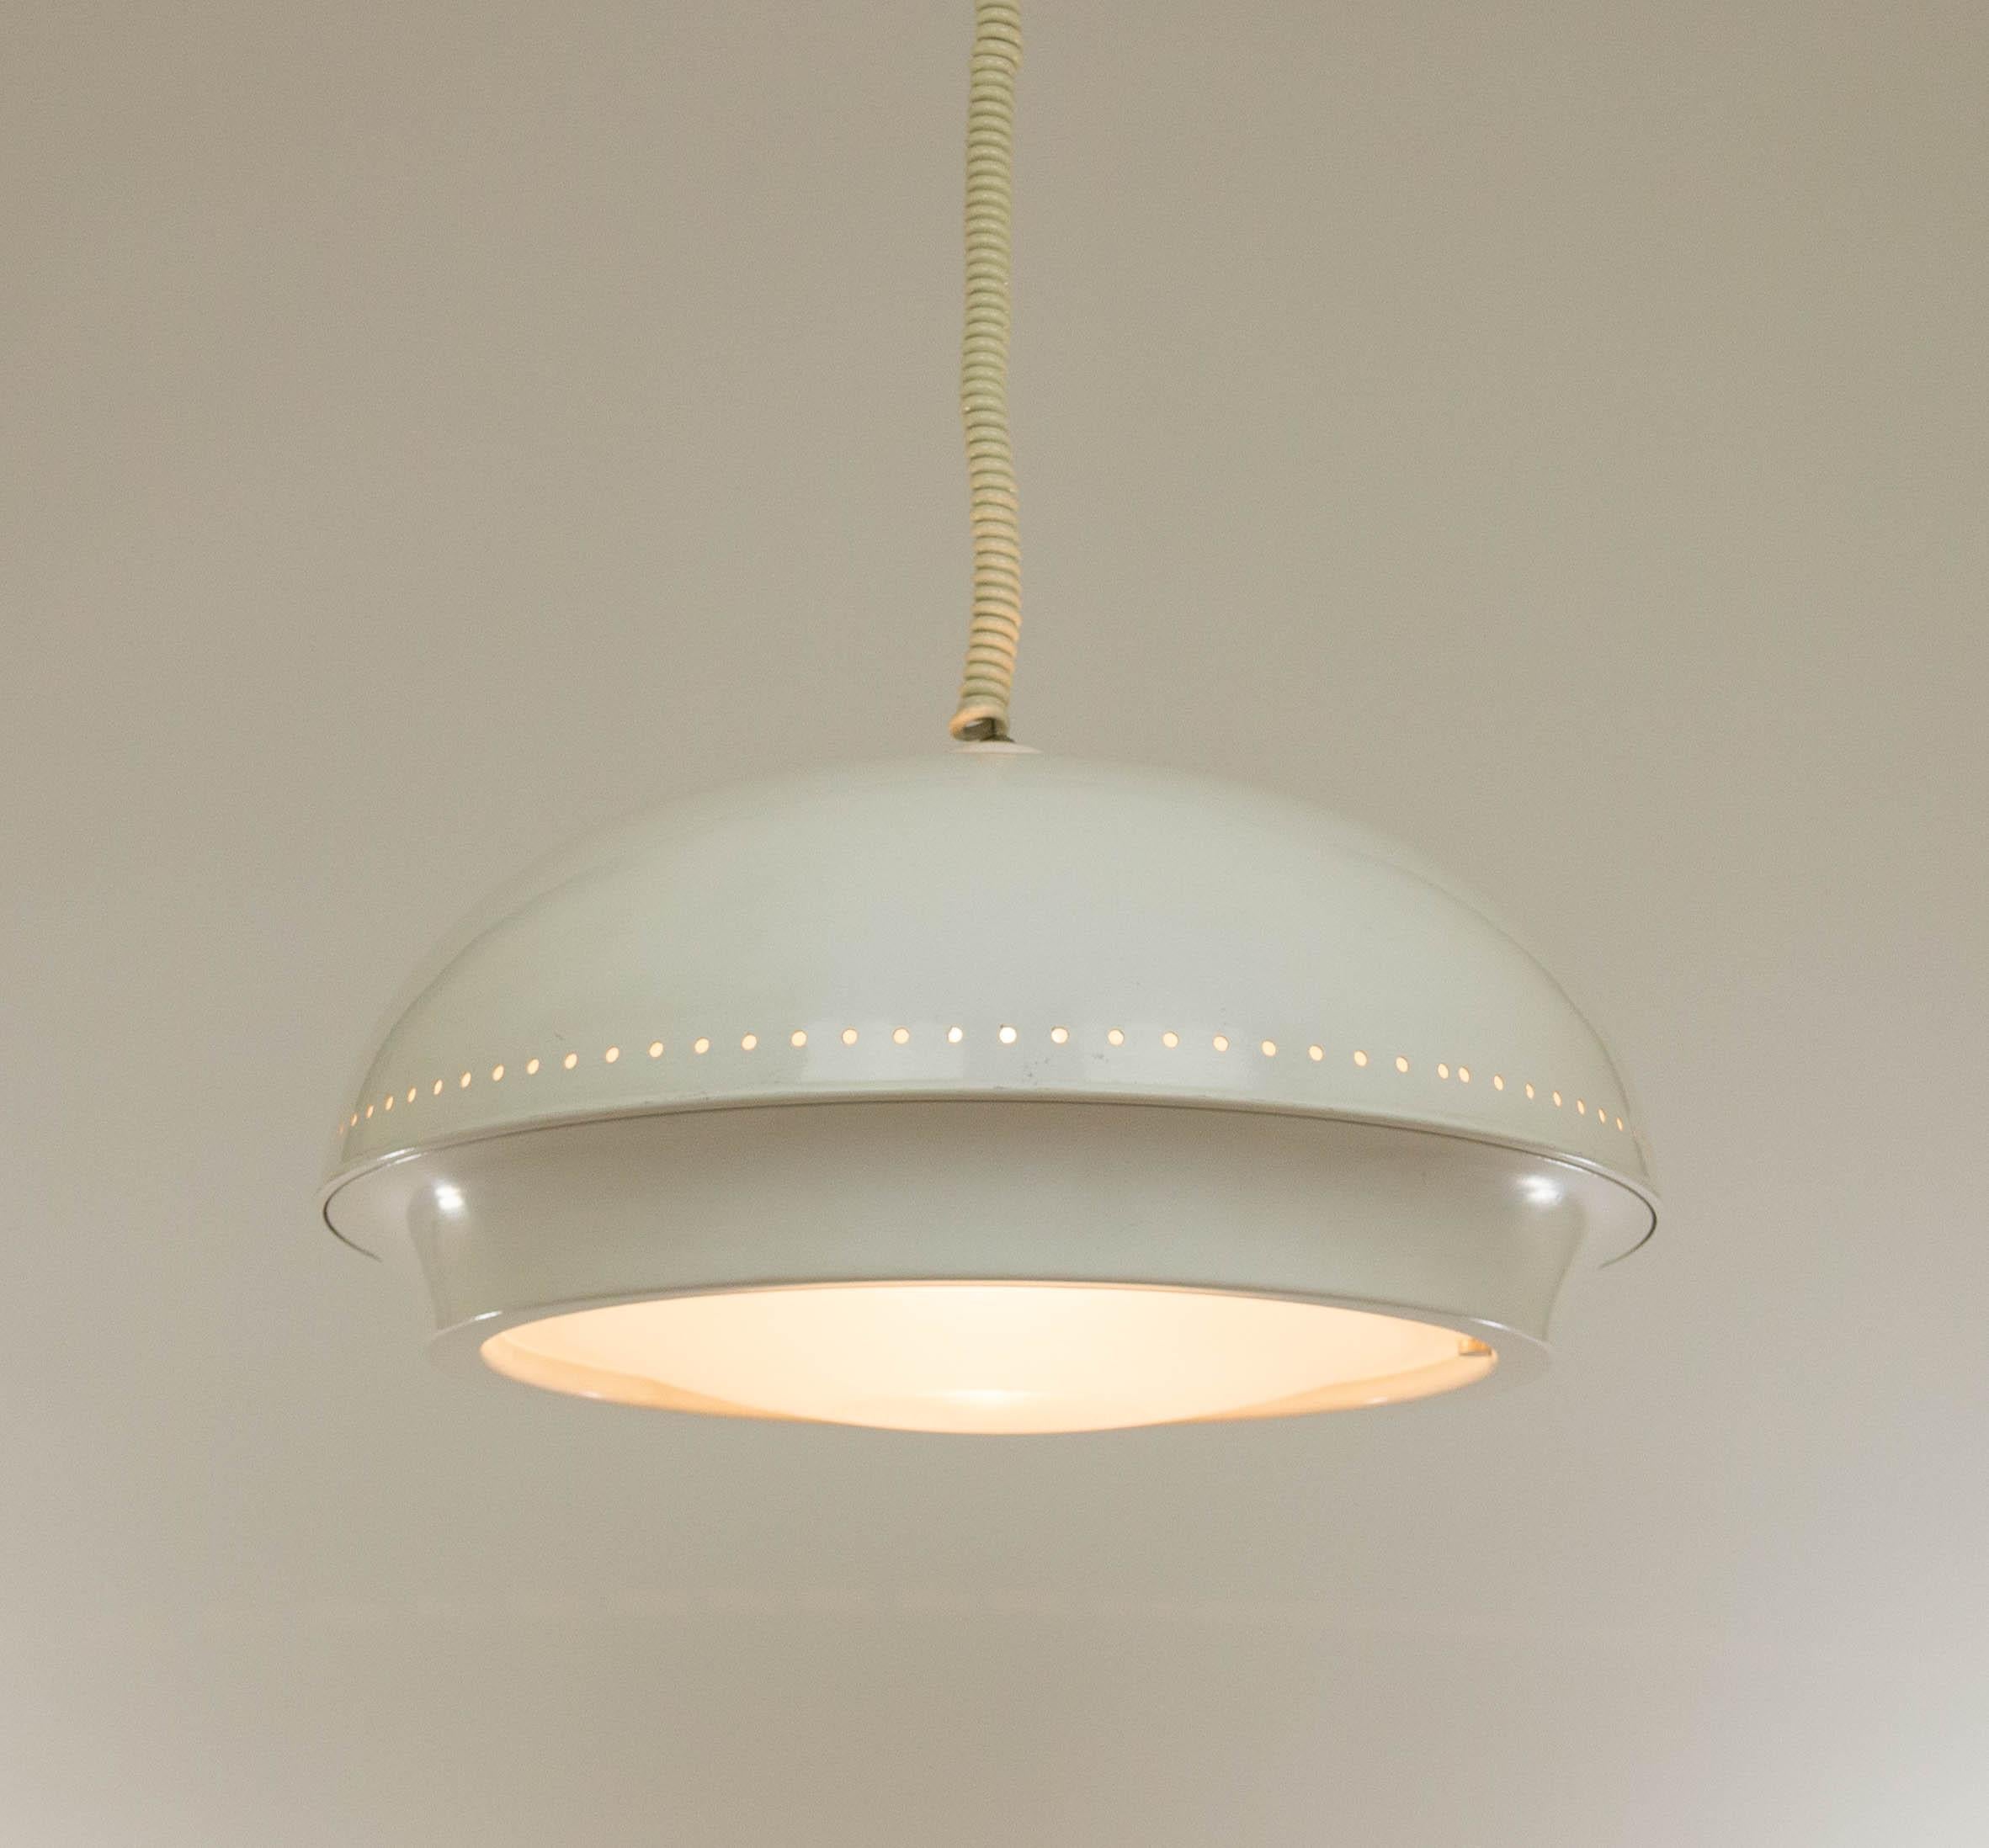 Mid-20th Century Nigritella Pendant by Afra and Tobia Scarpa for Flos, 1960s For Sale